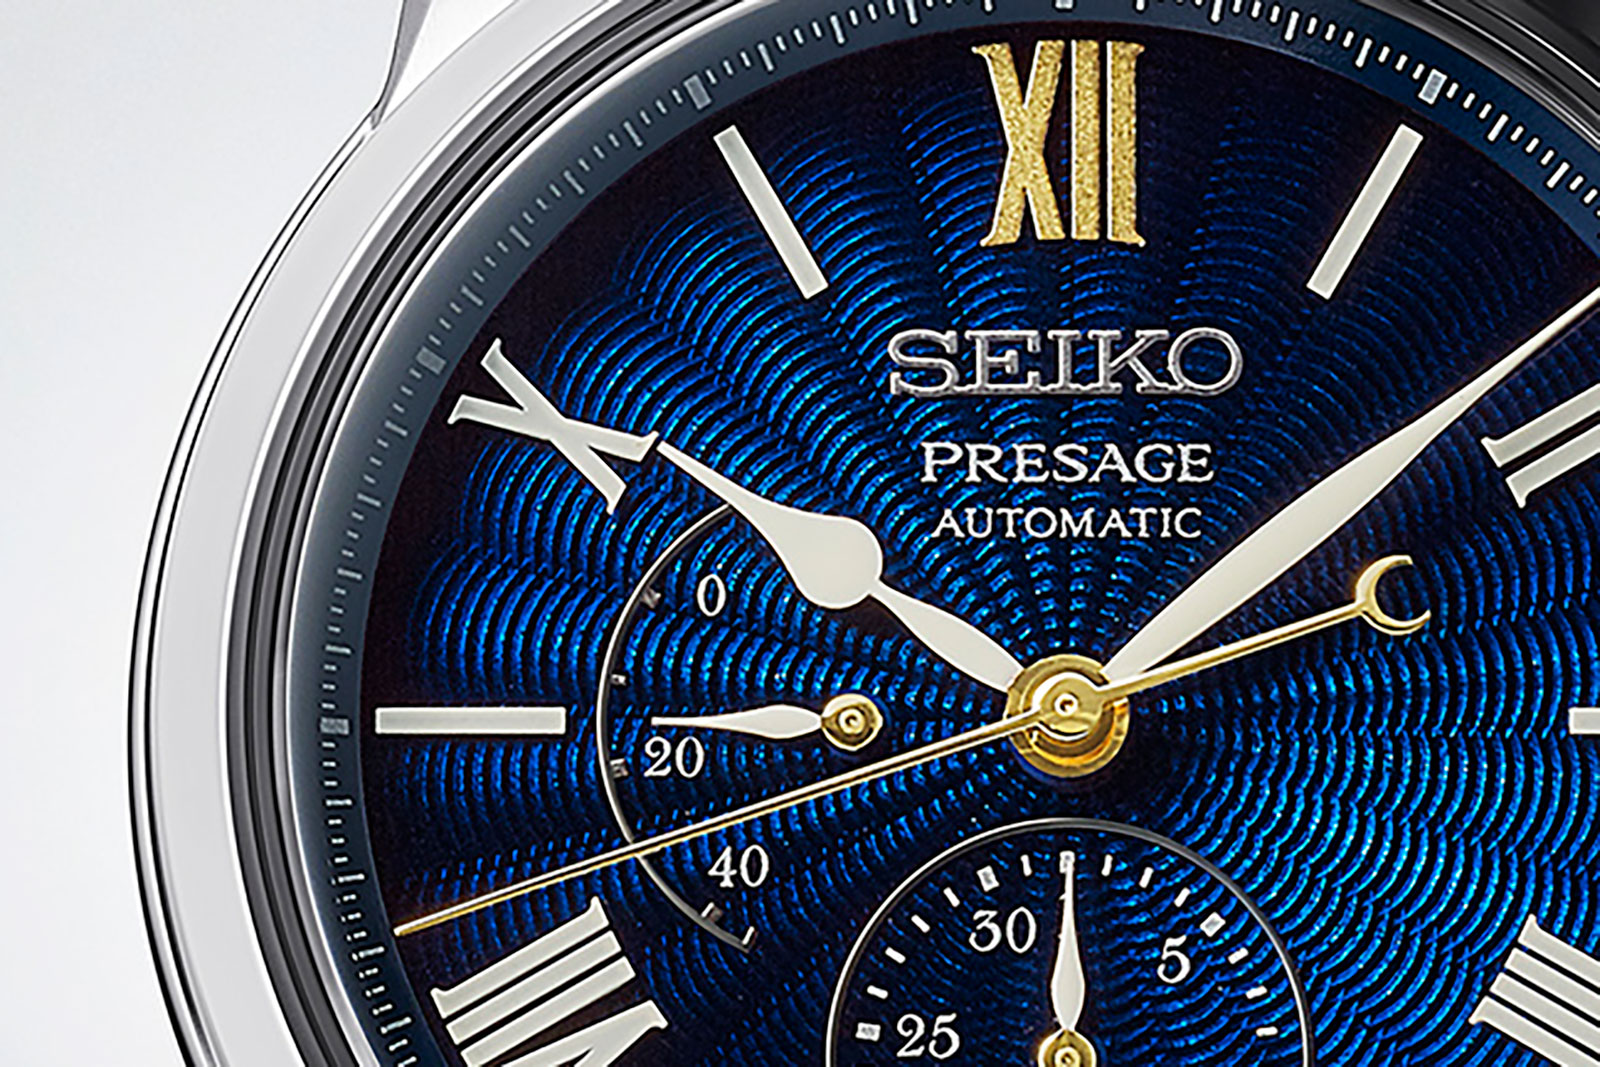 Seiko Introduces the Presage Craftsmanship Limited Editions | SJX Watches